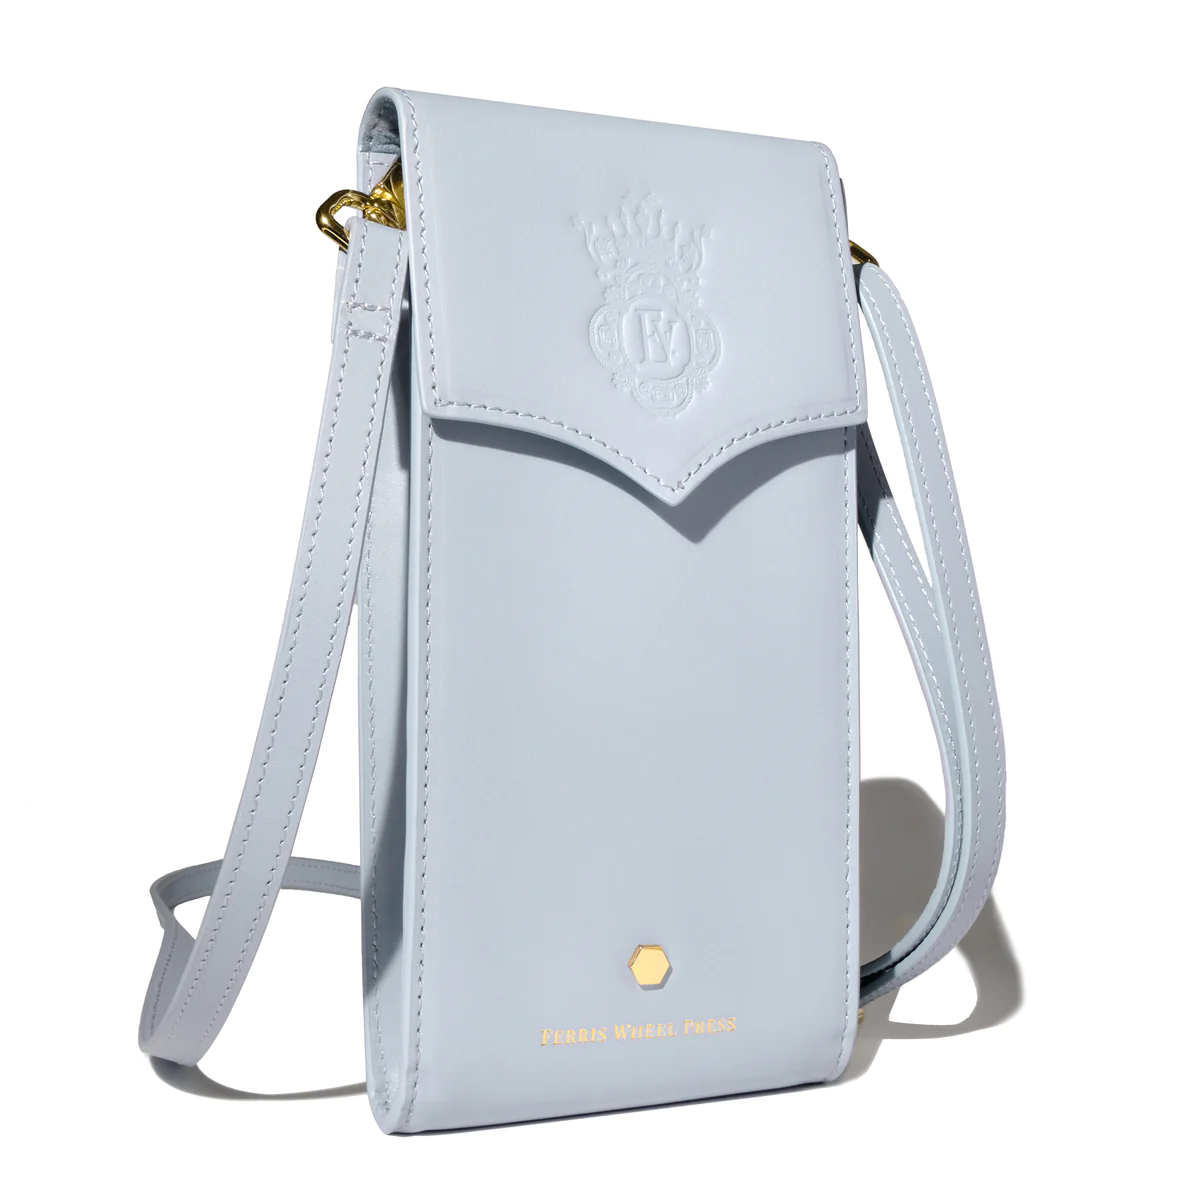 Leather stationary collection - The pendant Purse / Light blue